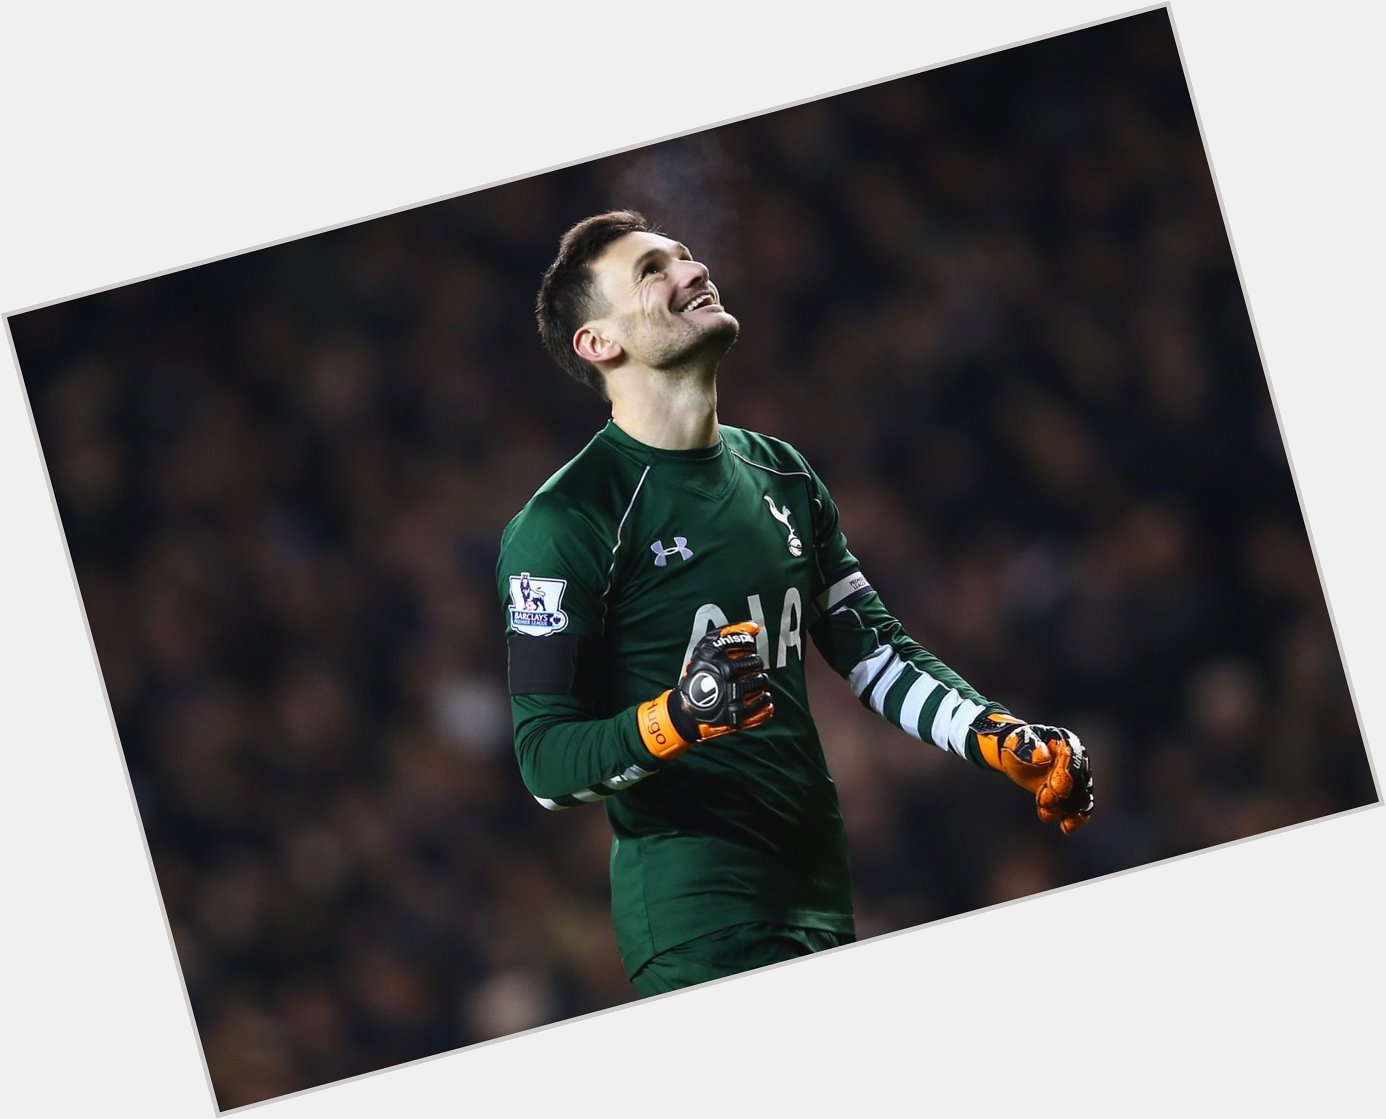 A very happy birthday to Hugo Lloris! Have a great day with three points to celebrate! 